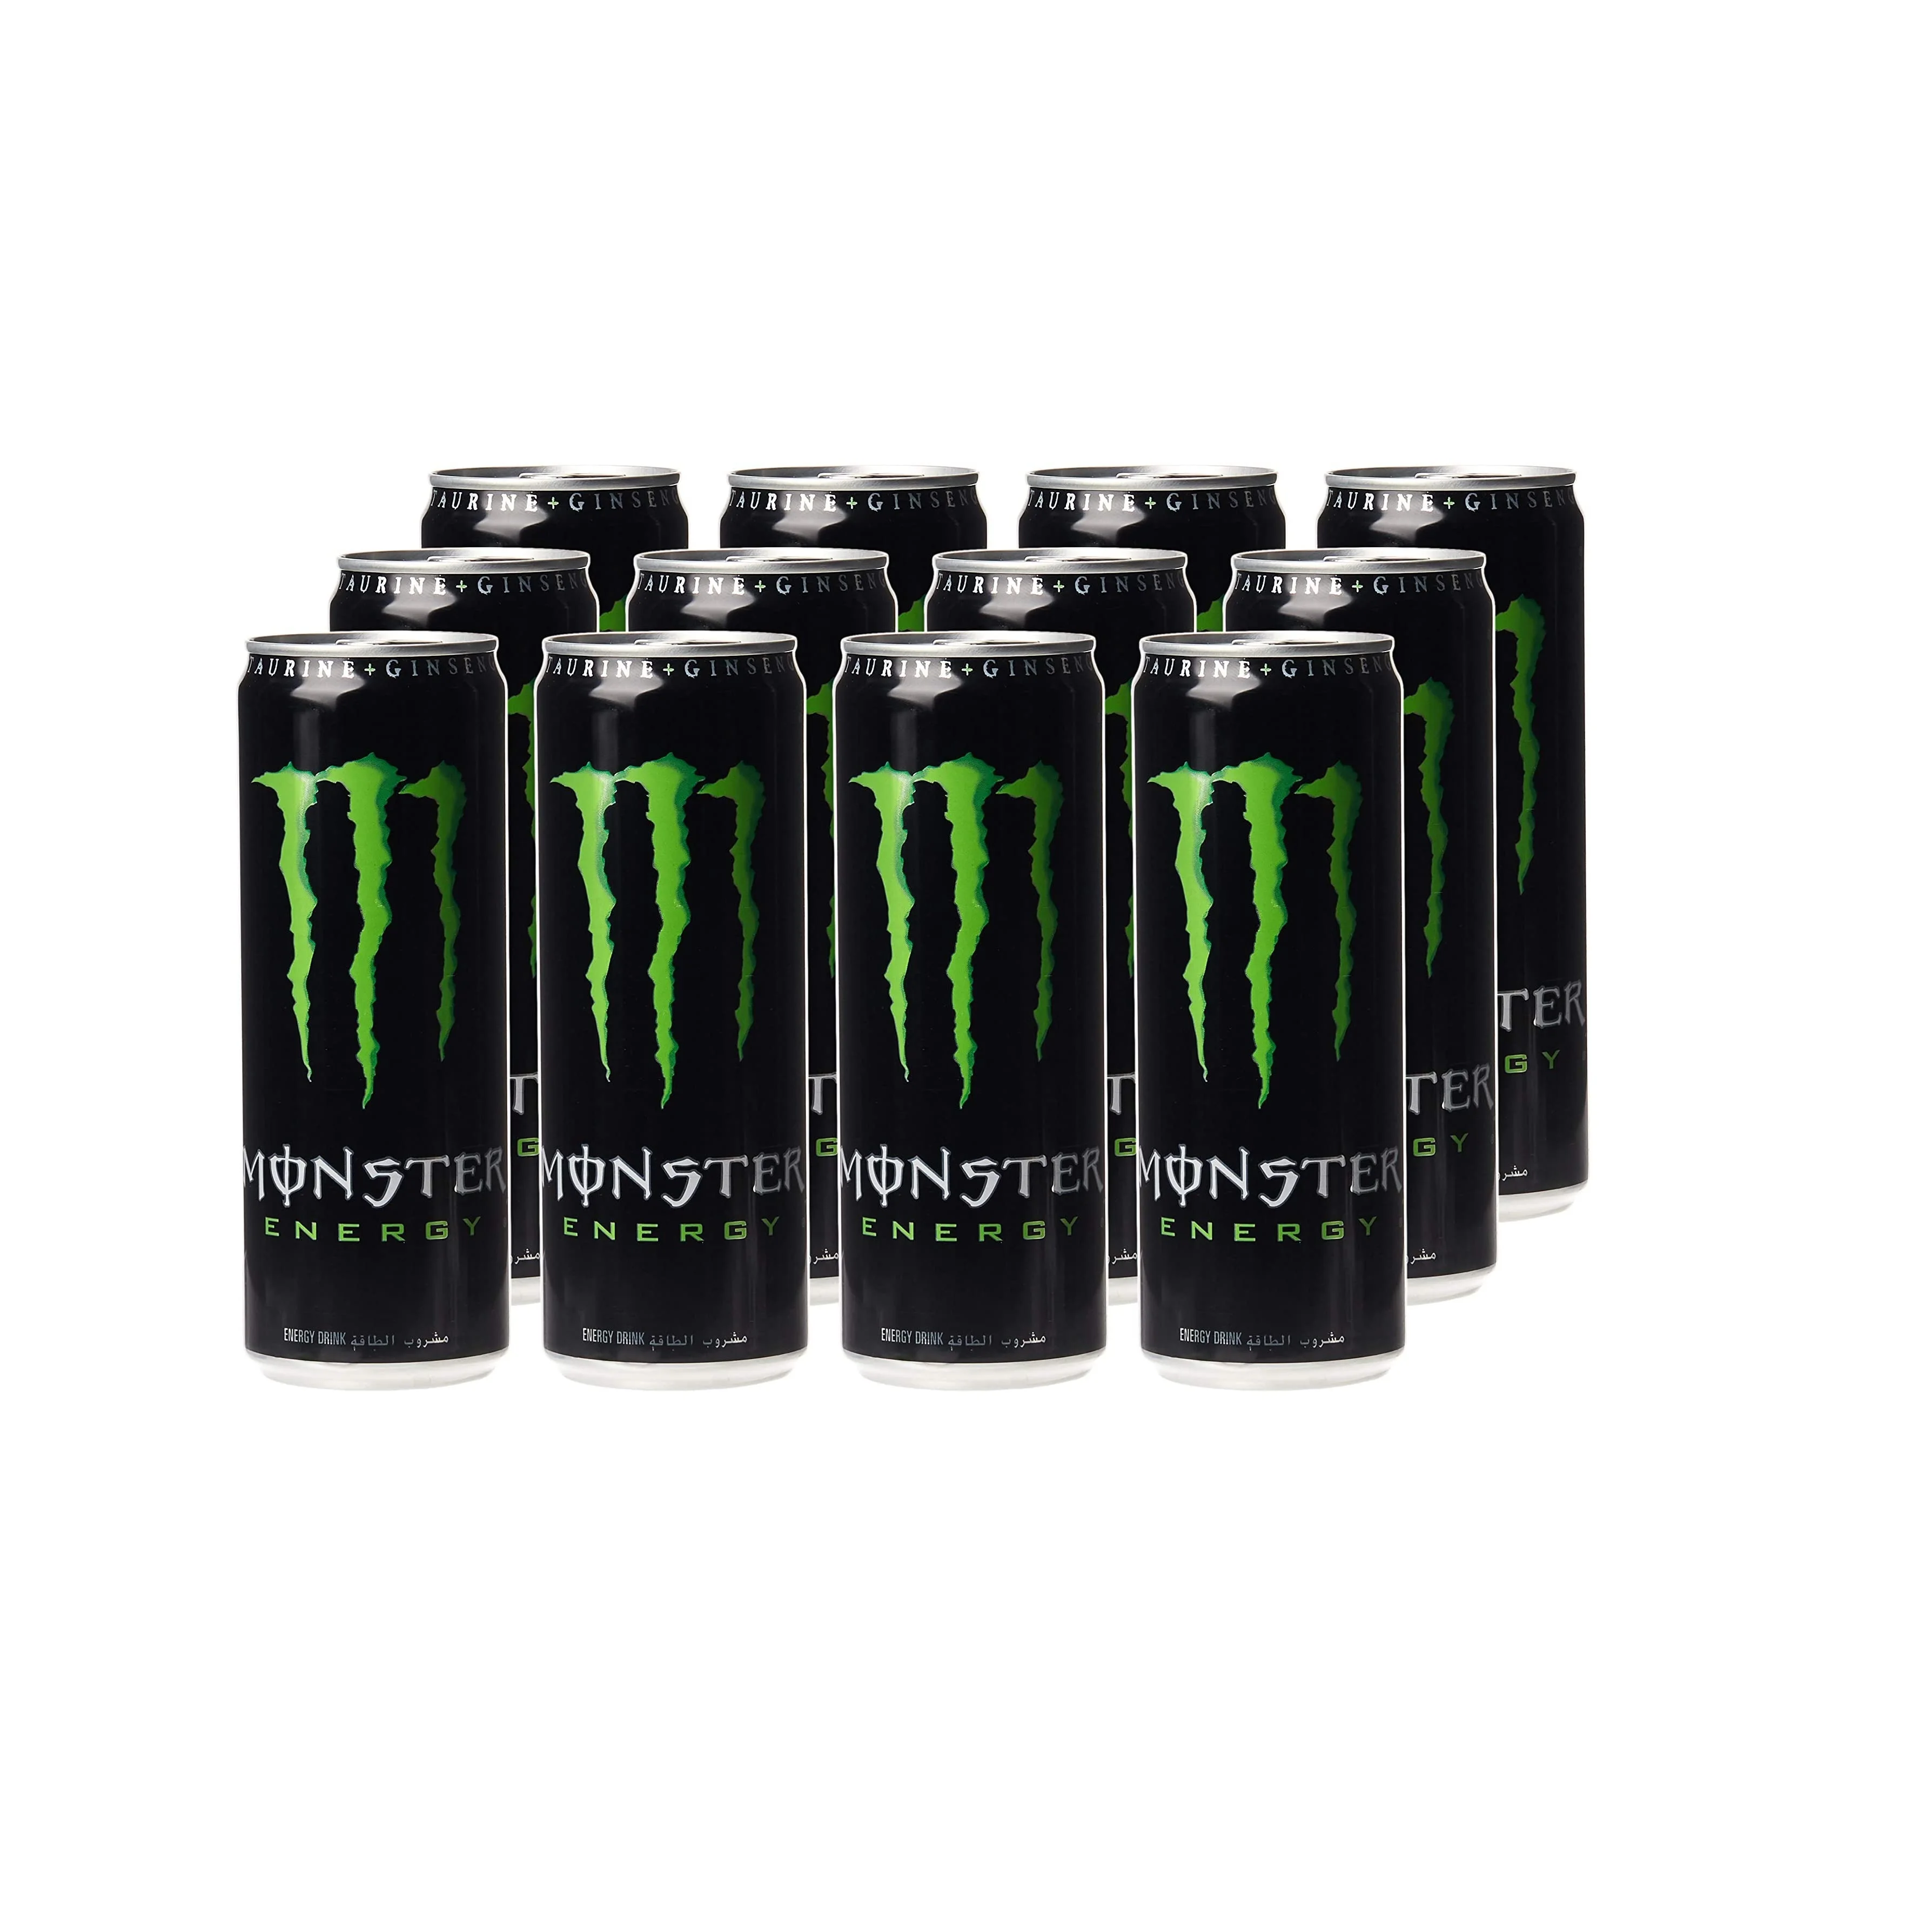 Buy Monster Energy Drink 500ML Cans Drinks At Best Price